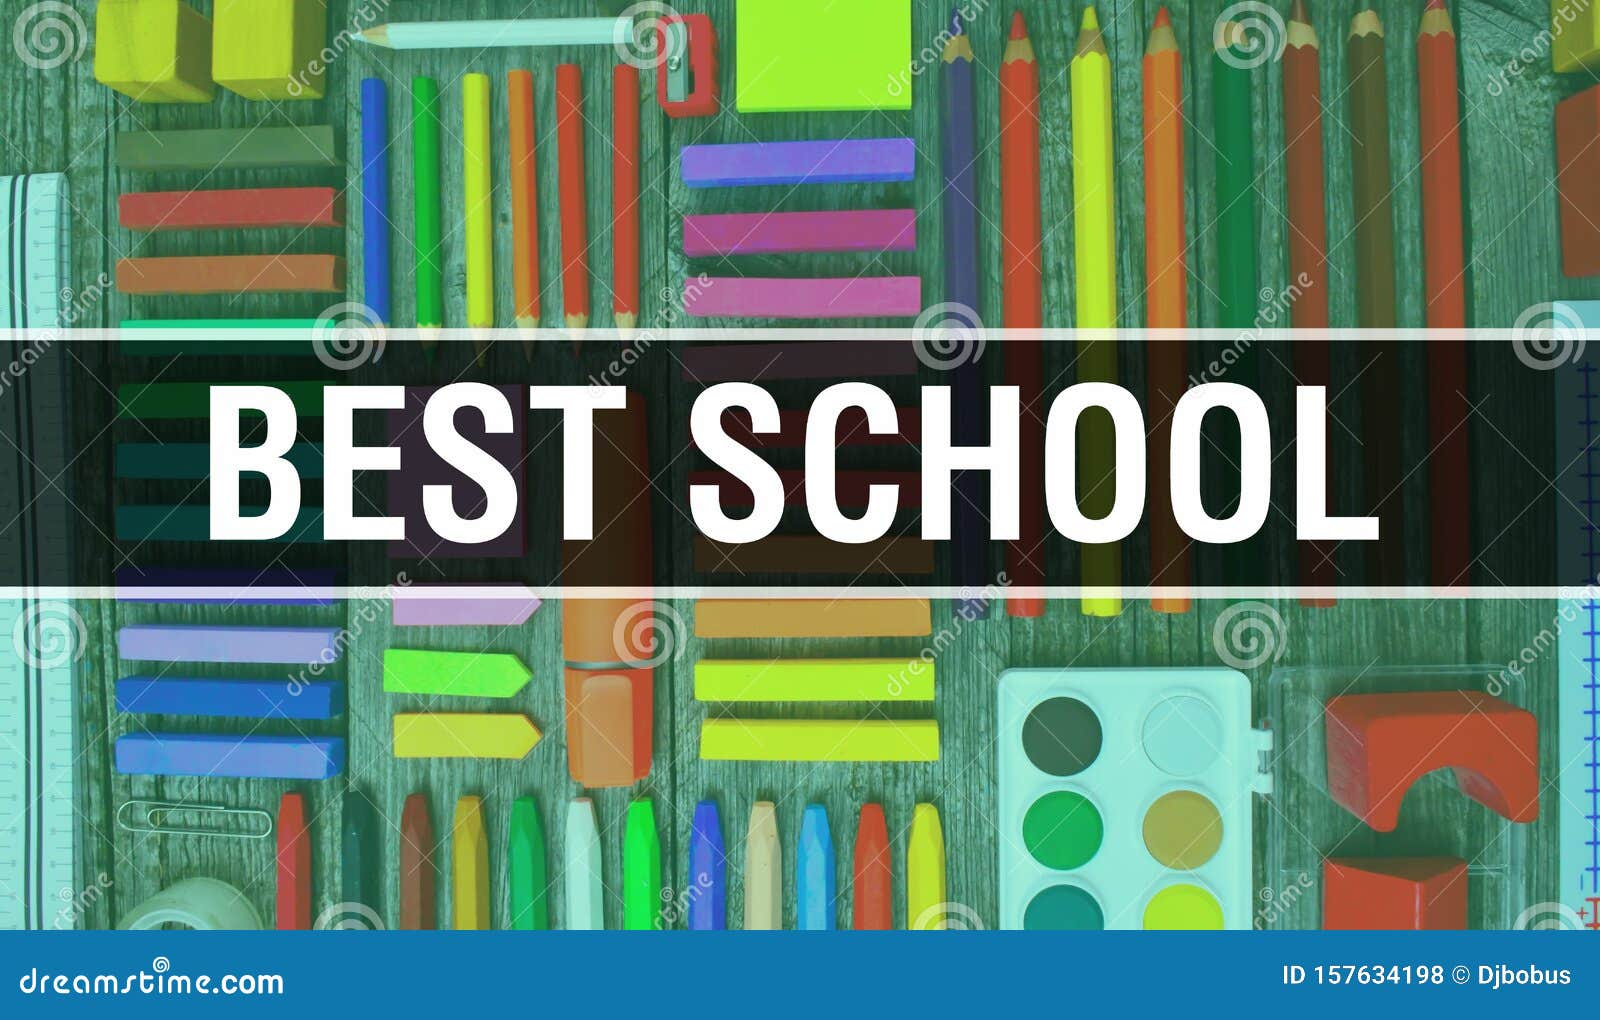 Best School Text with Back To School Wallpaper. Best School and School  Education Background Concept Stock Photo - Image of september, concept:  157634198